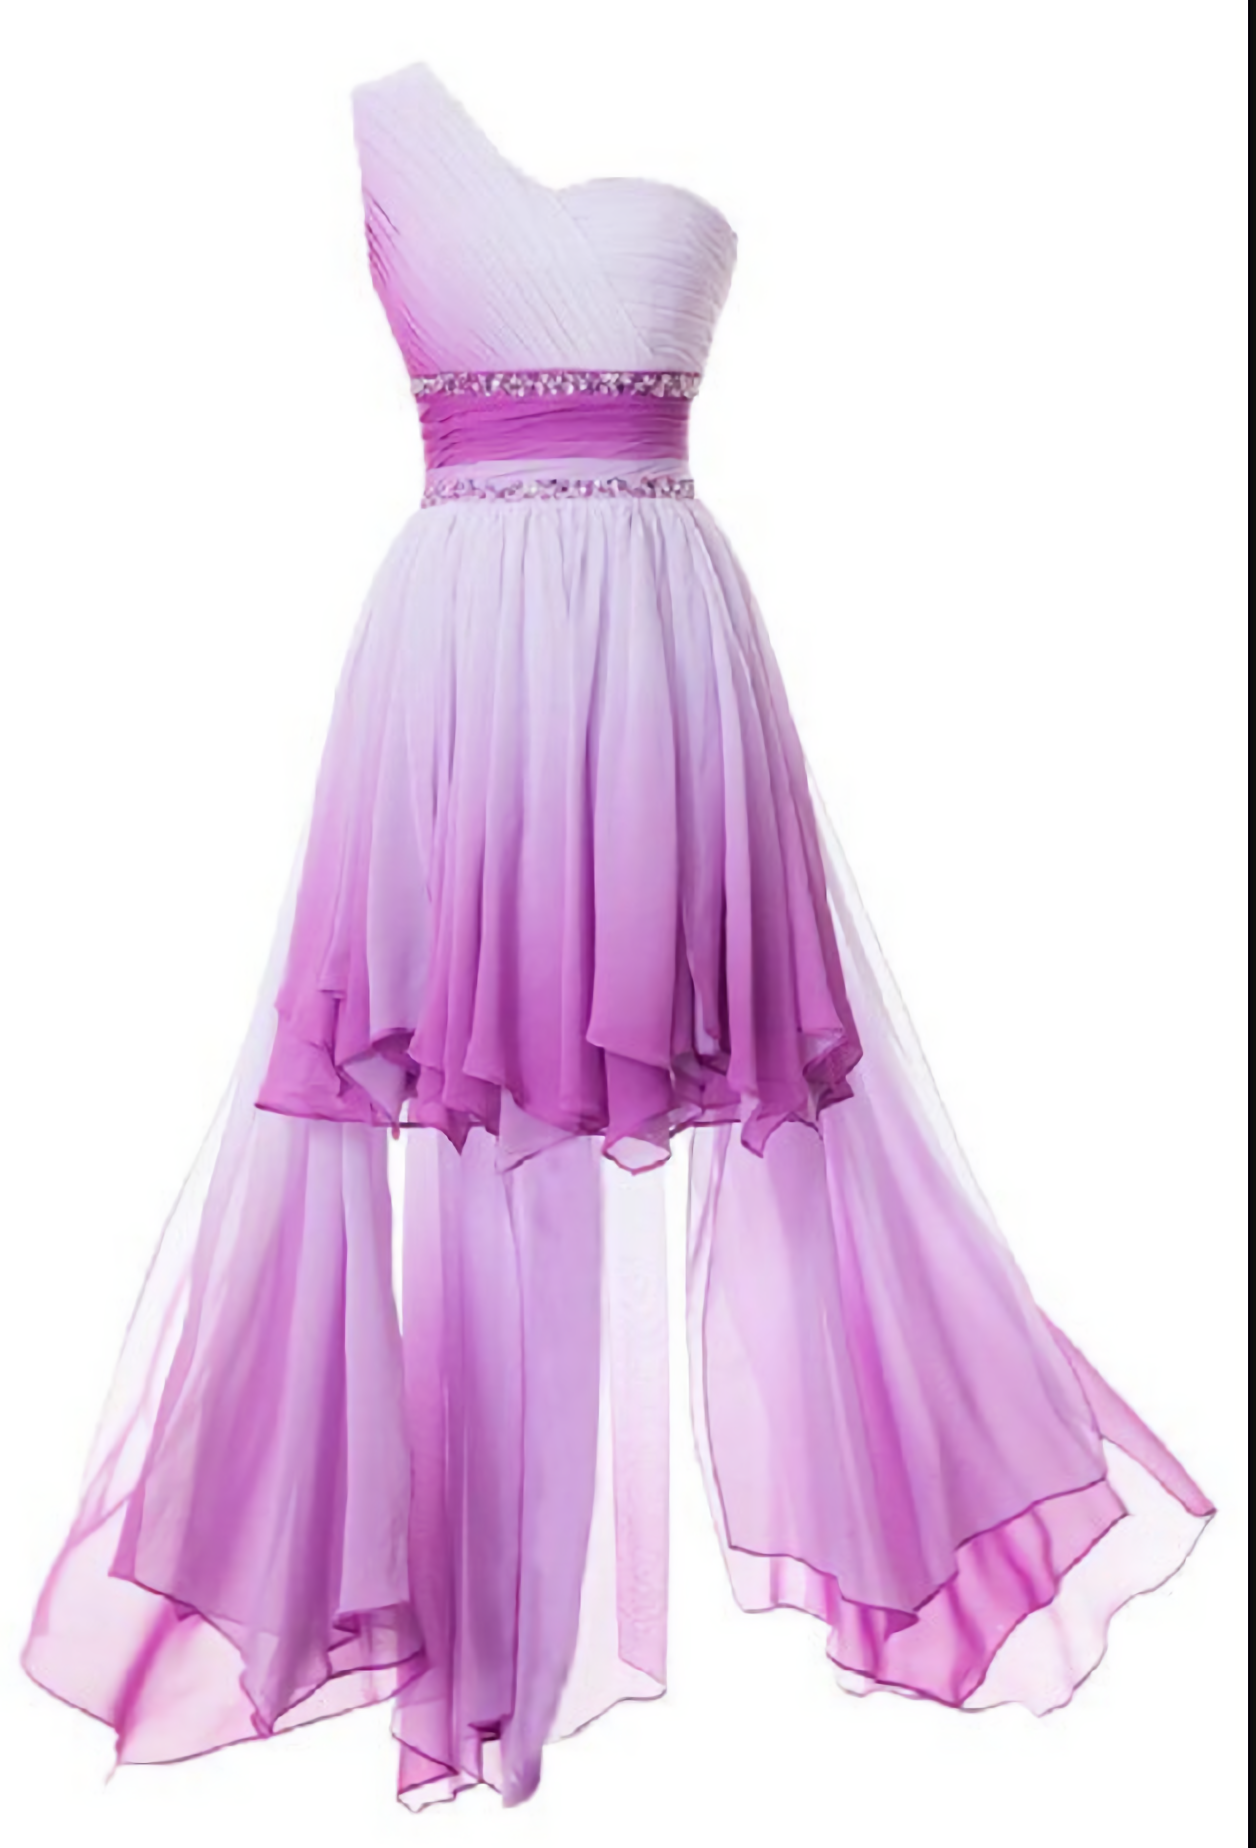 One Shoulder High Low Chiffon Bridesmaid Dresses, Homecoming Gowns For Juniors